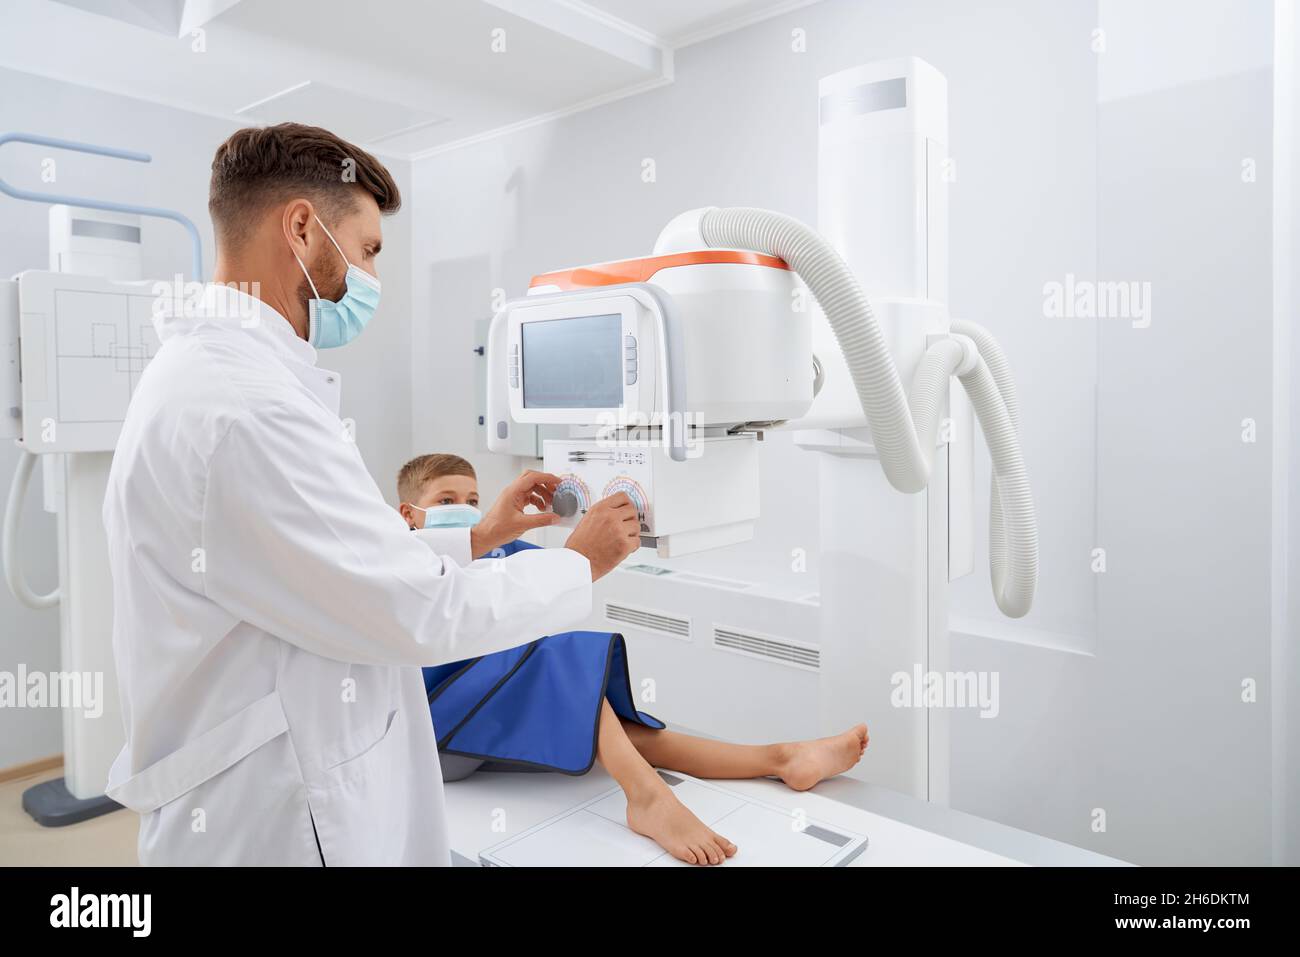 Side view of professional radiologist using moving modes equipment in clinic. Boy lie down in hospital on ultrasound diagnostic for leg after injury.Concept of kids medicine. Stock Photo